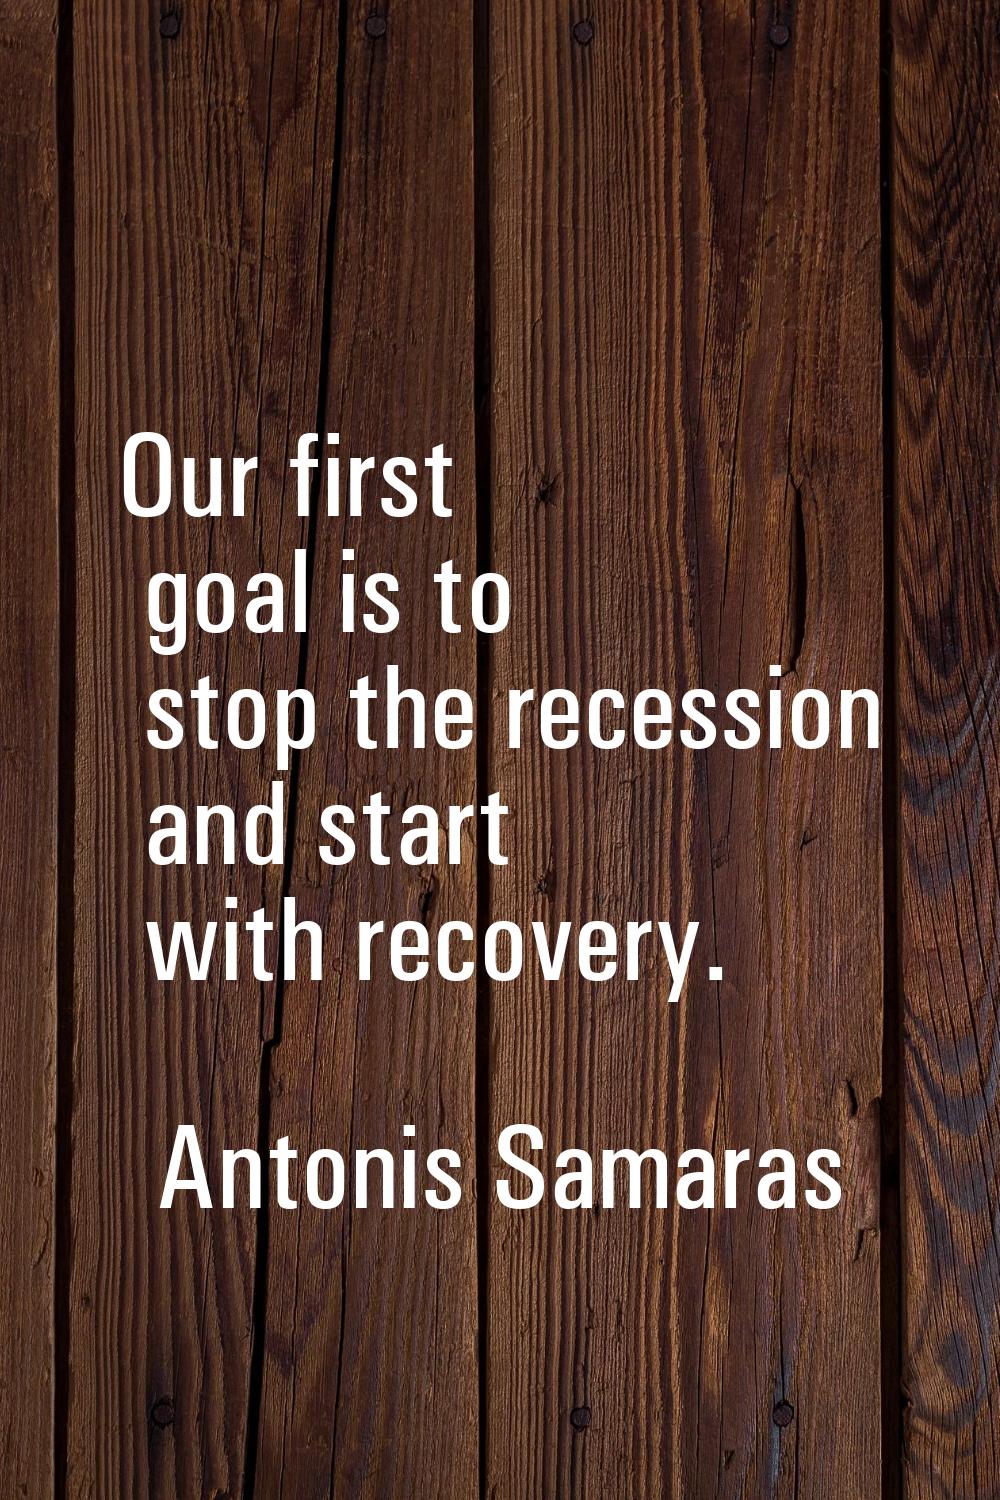 Our first goal is to stop the recession and start with recovery.